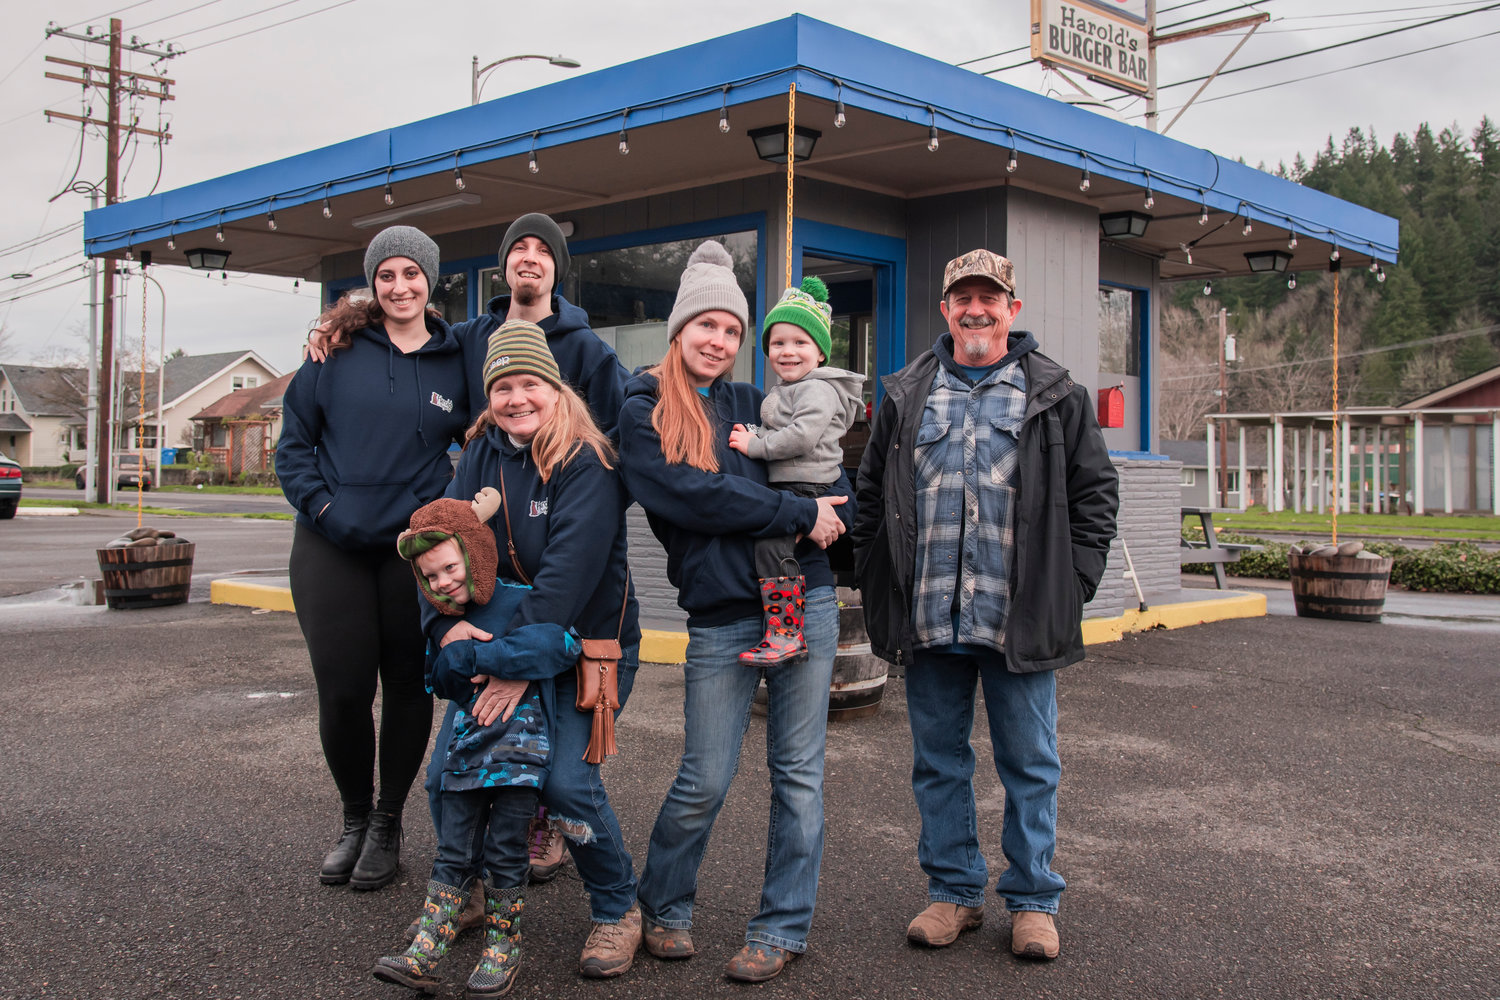 From left, Brenna Kinsey and Kyle Dyer, Lottie Dyer, with Aryelle Newton and her kids, and Michael Dyer smile and pose for a photo outside Harold’s Burger Bar located at 727 South Gold Street in Centralia.